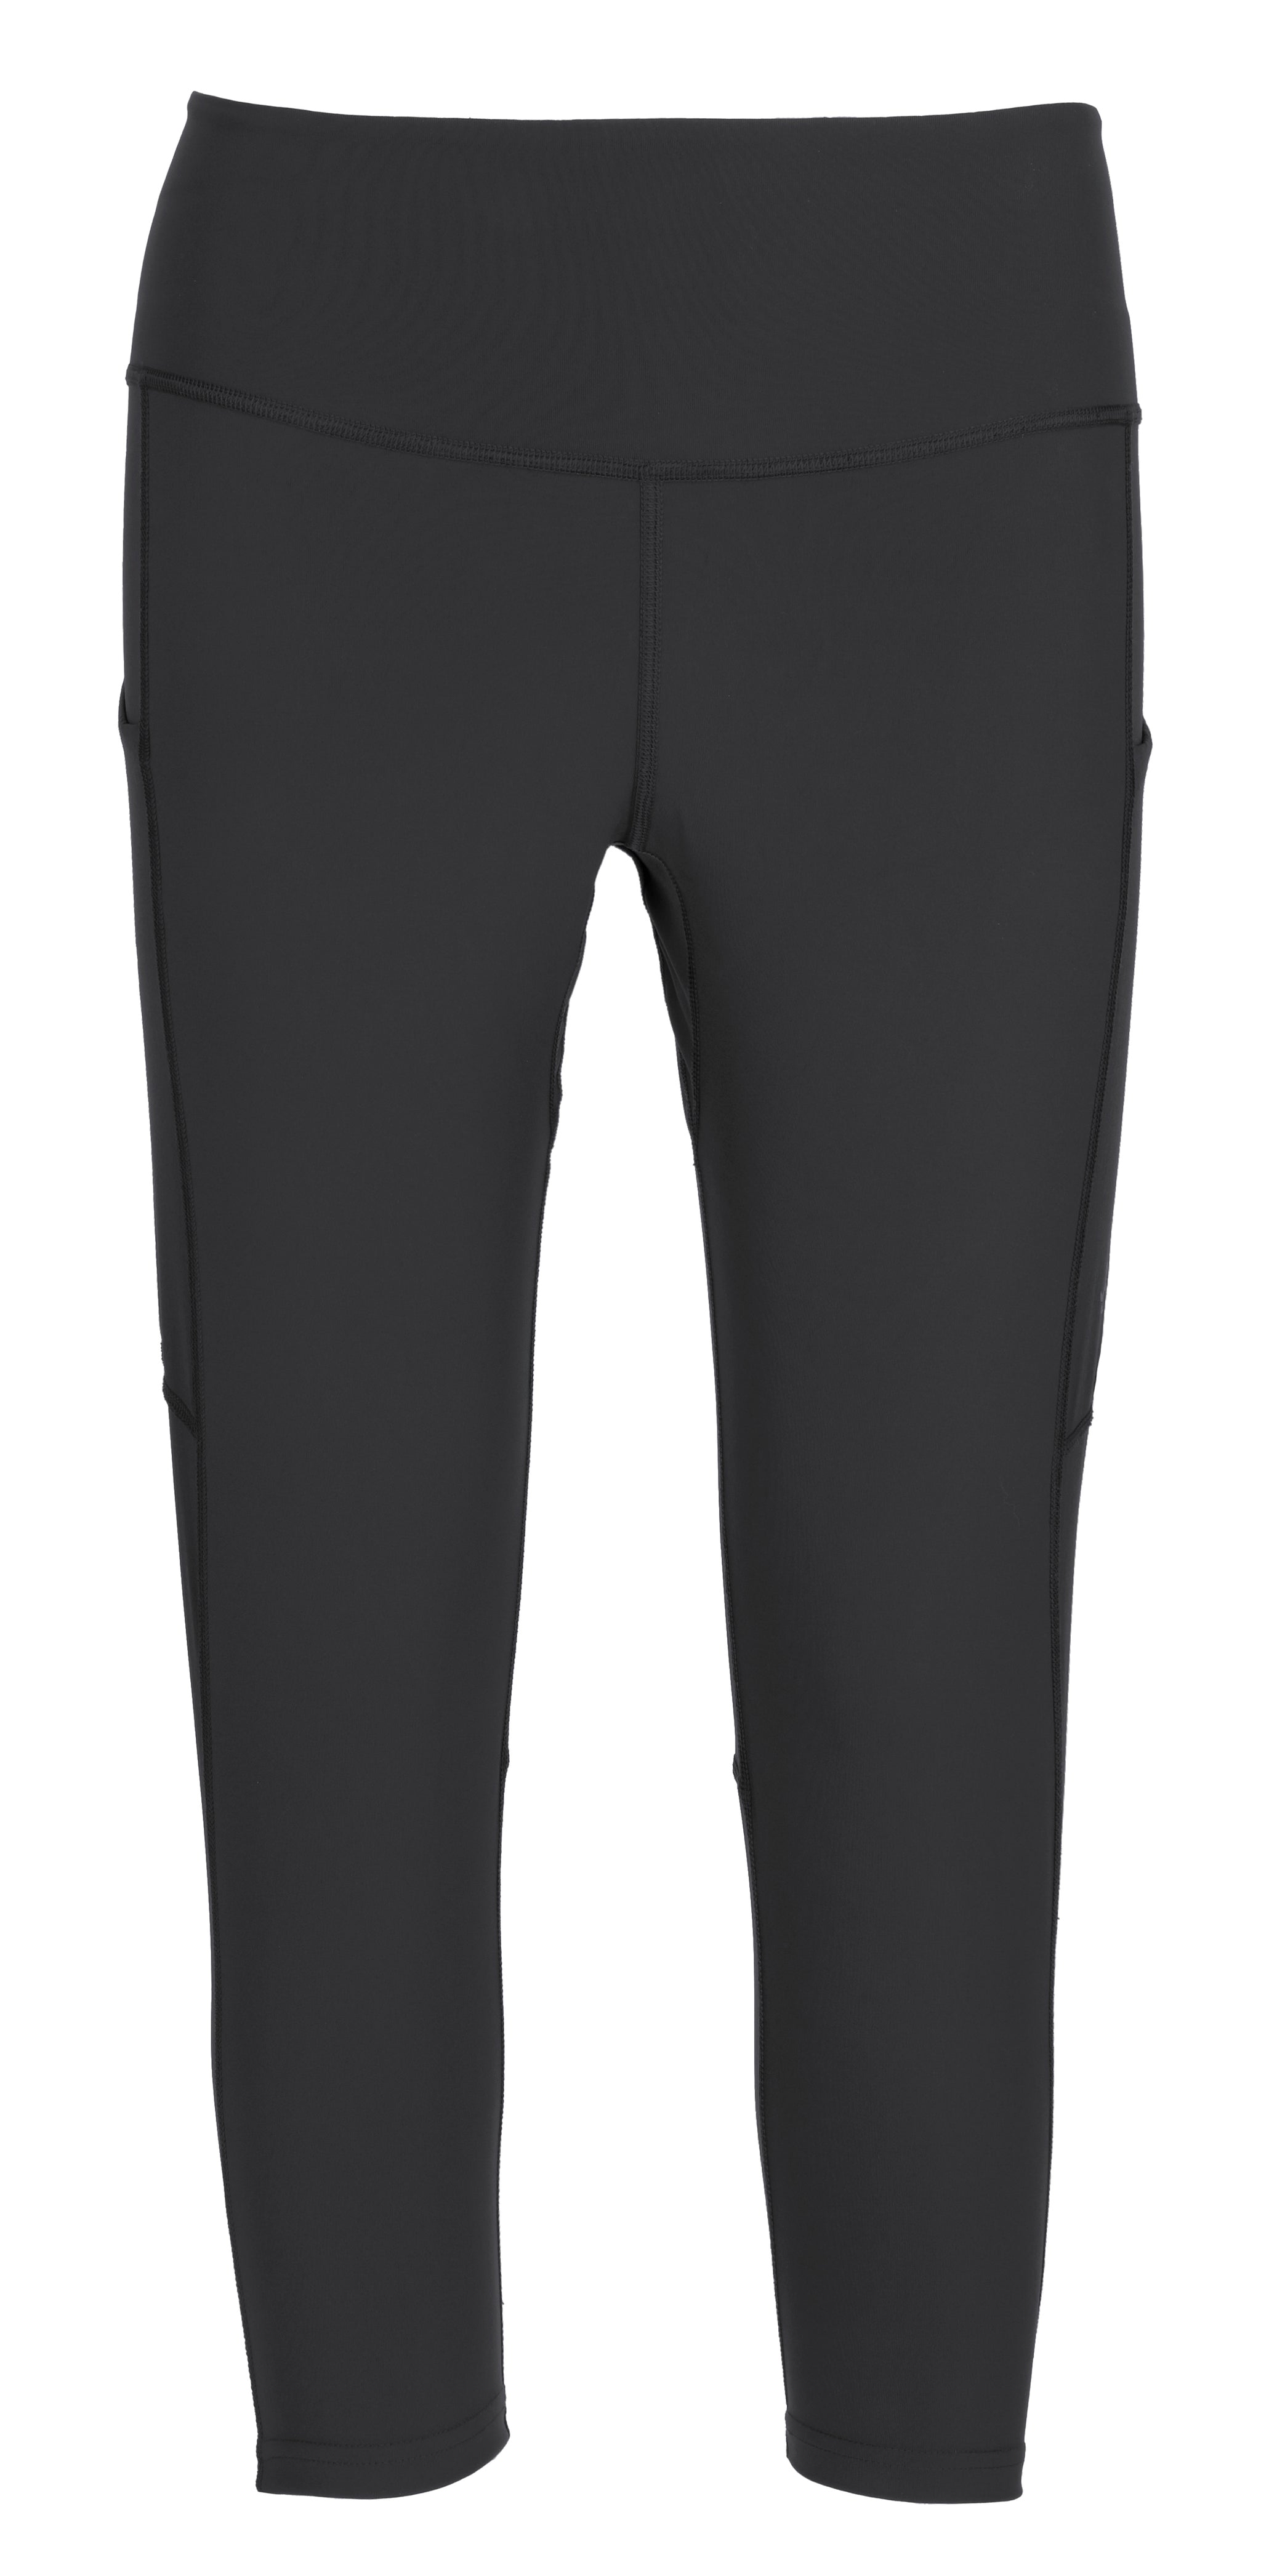 Rab Women's Talus Tights 3/4 - Outfitters Store